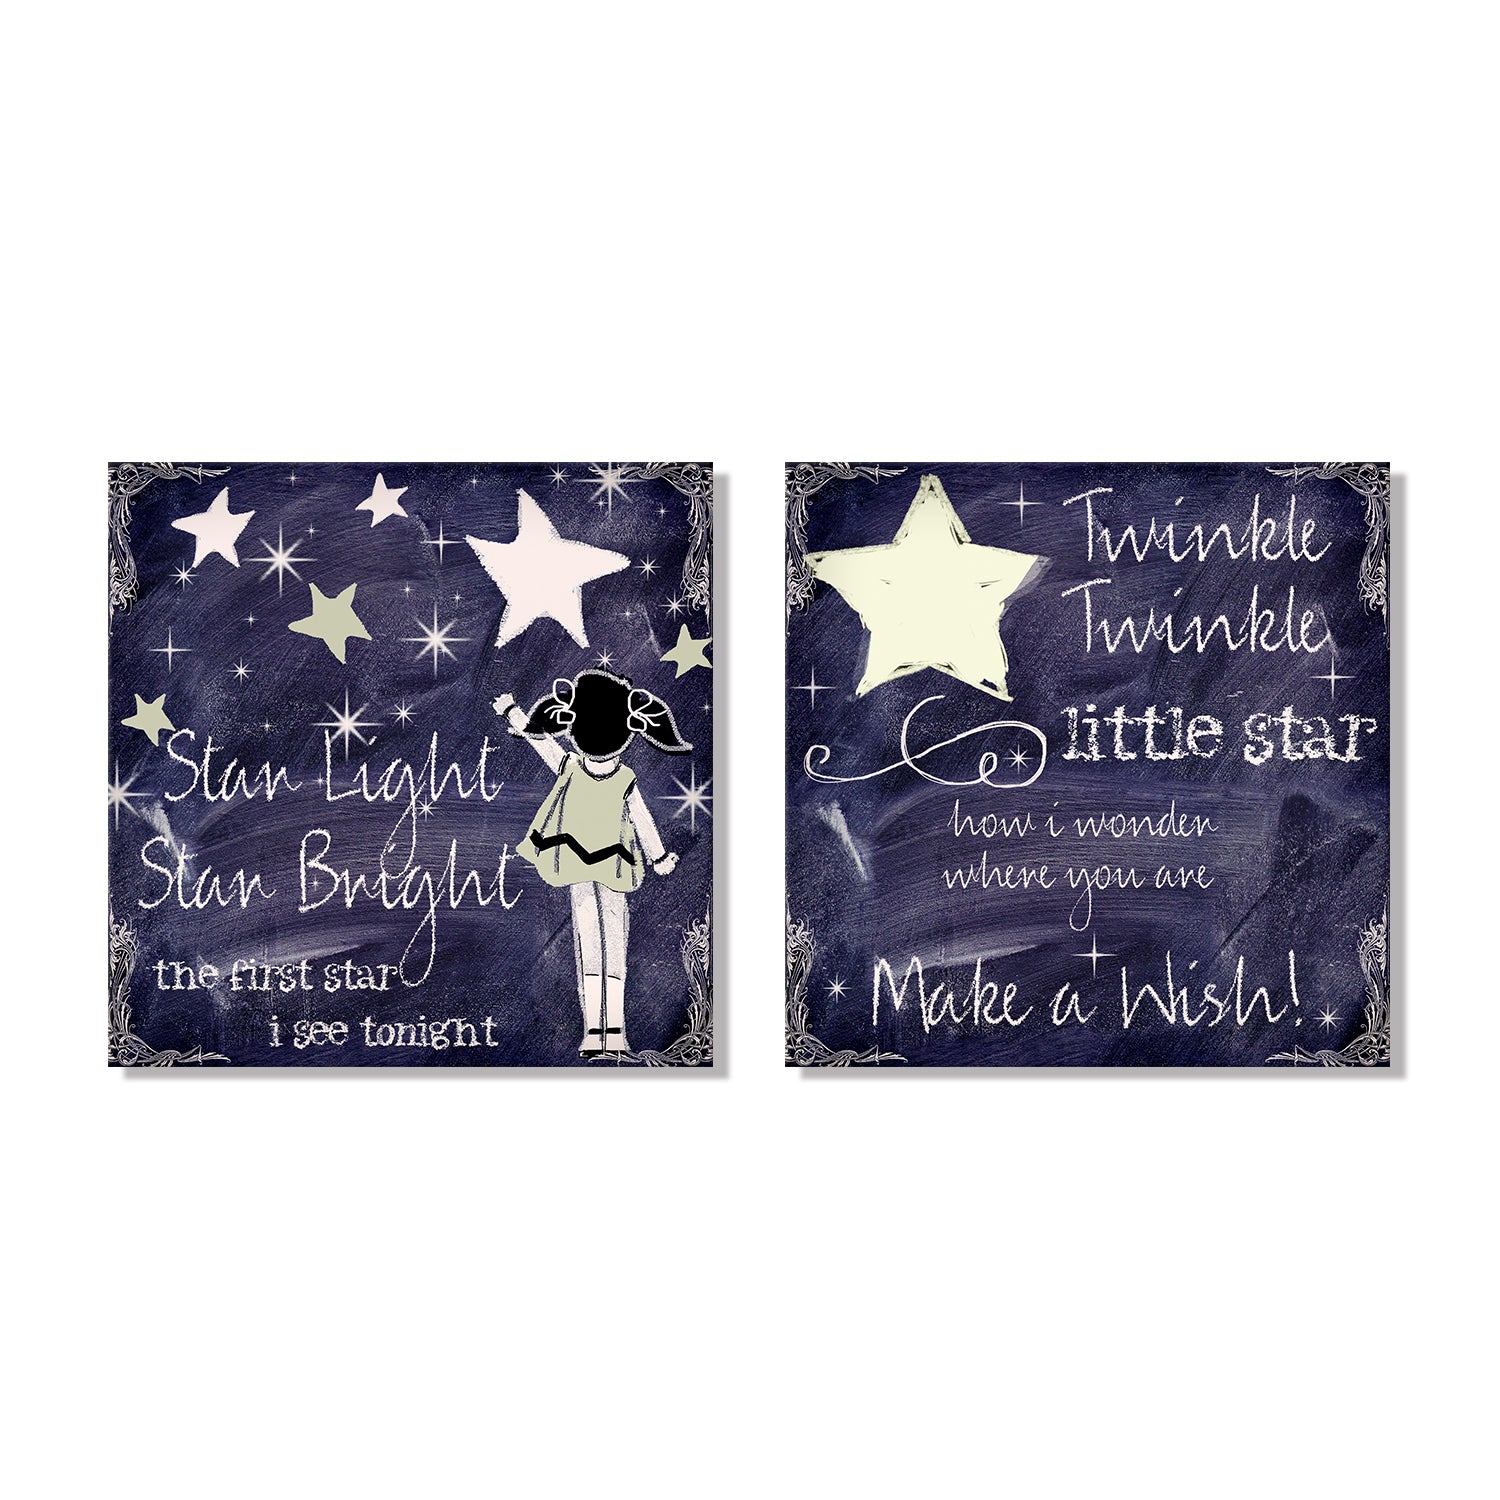 Hand Painted Nursery Rhymes Chalk Board Canvas - Twin Pack